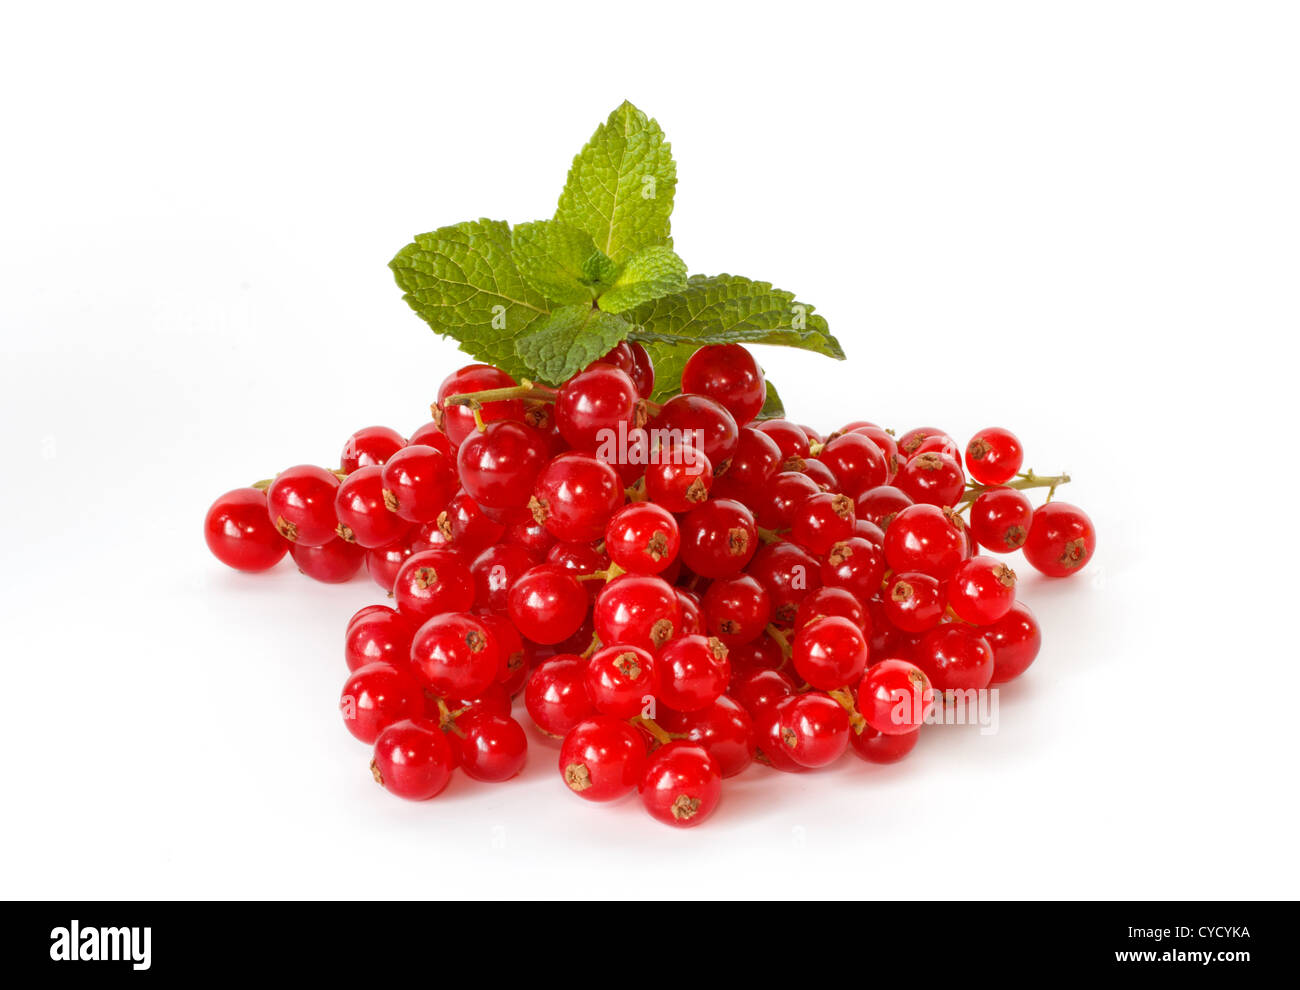 Fresh ripe red currant with a sprig of mint Stock Photo